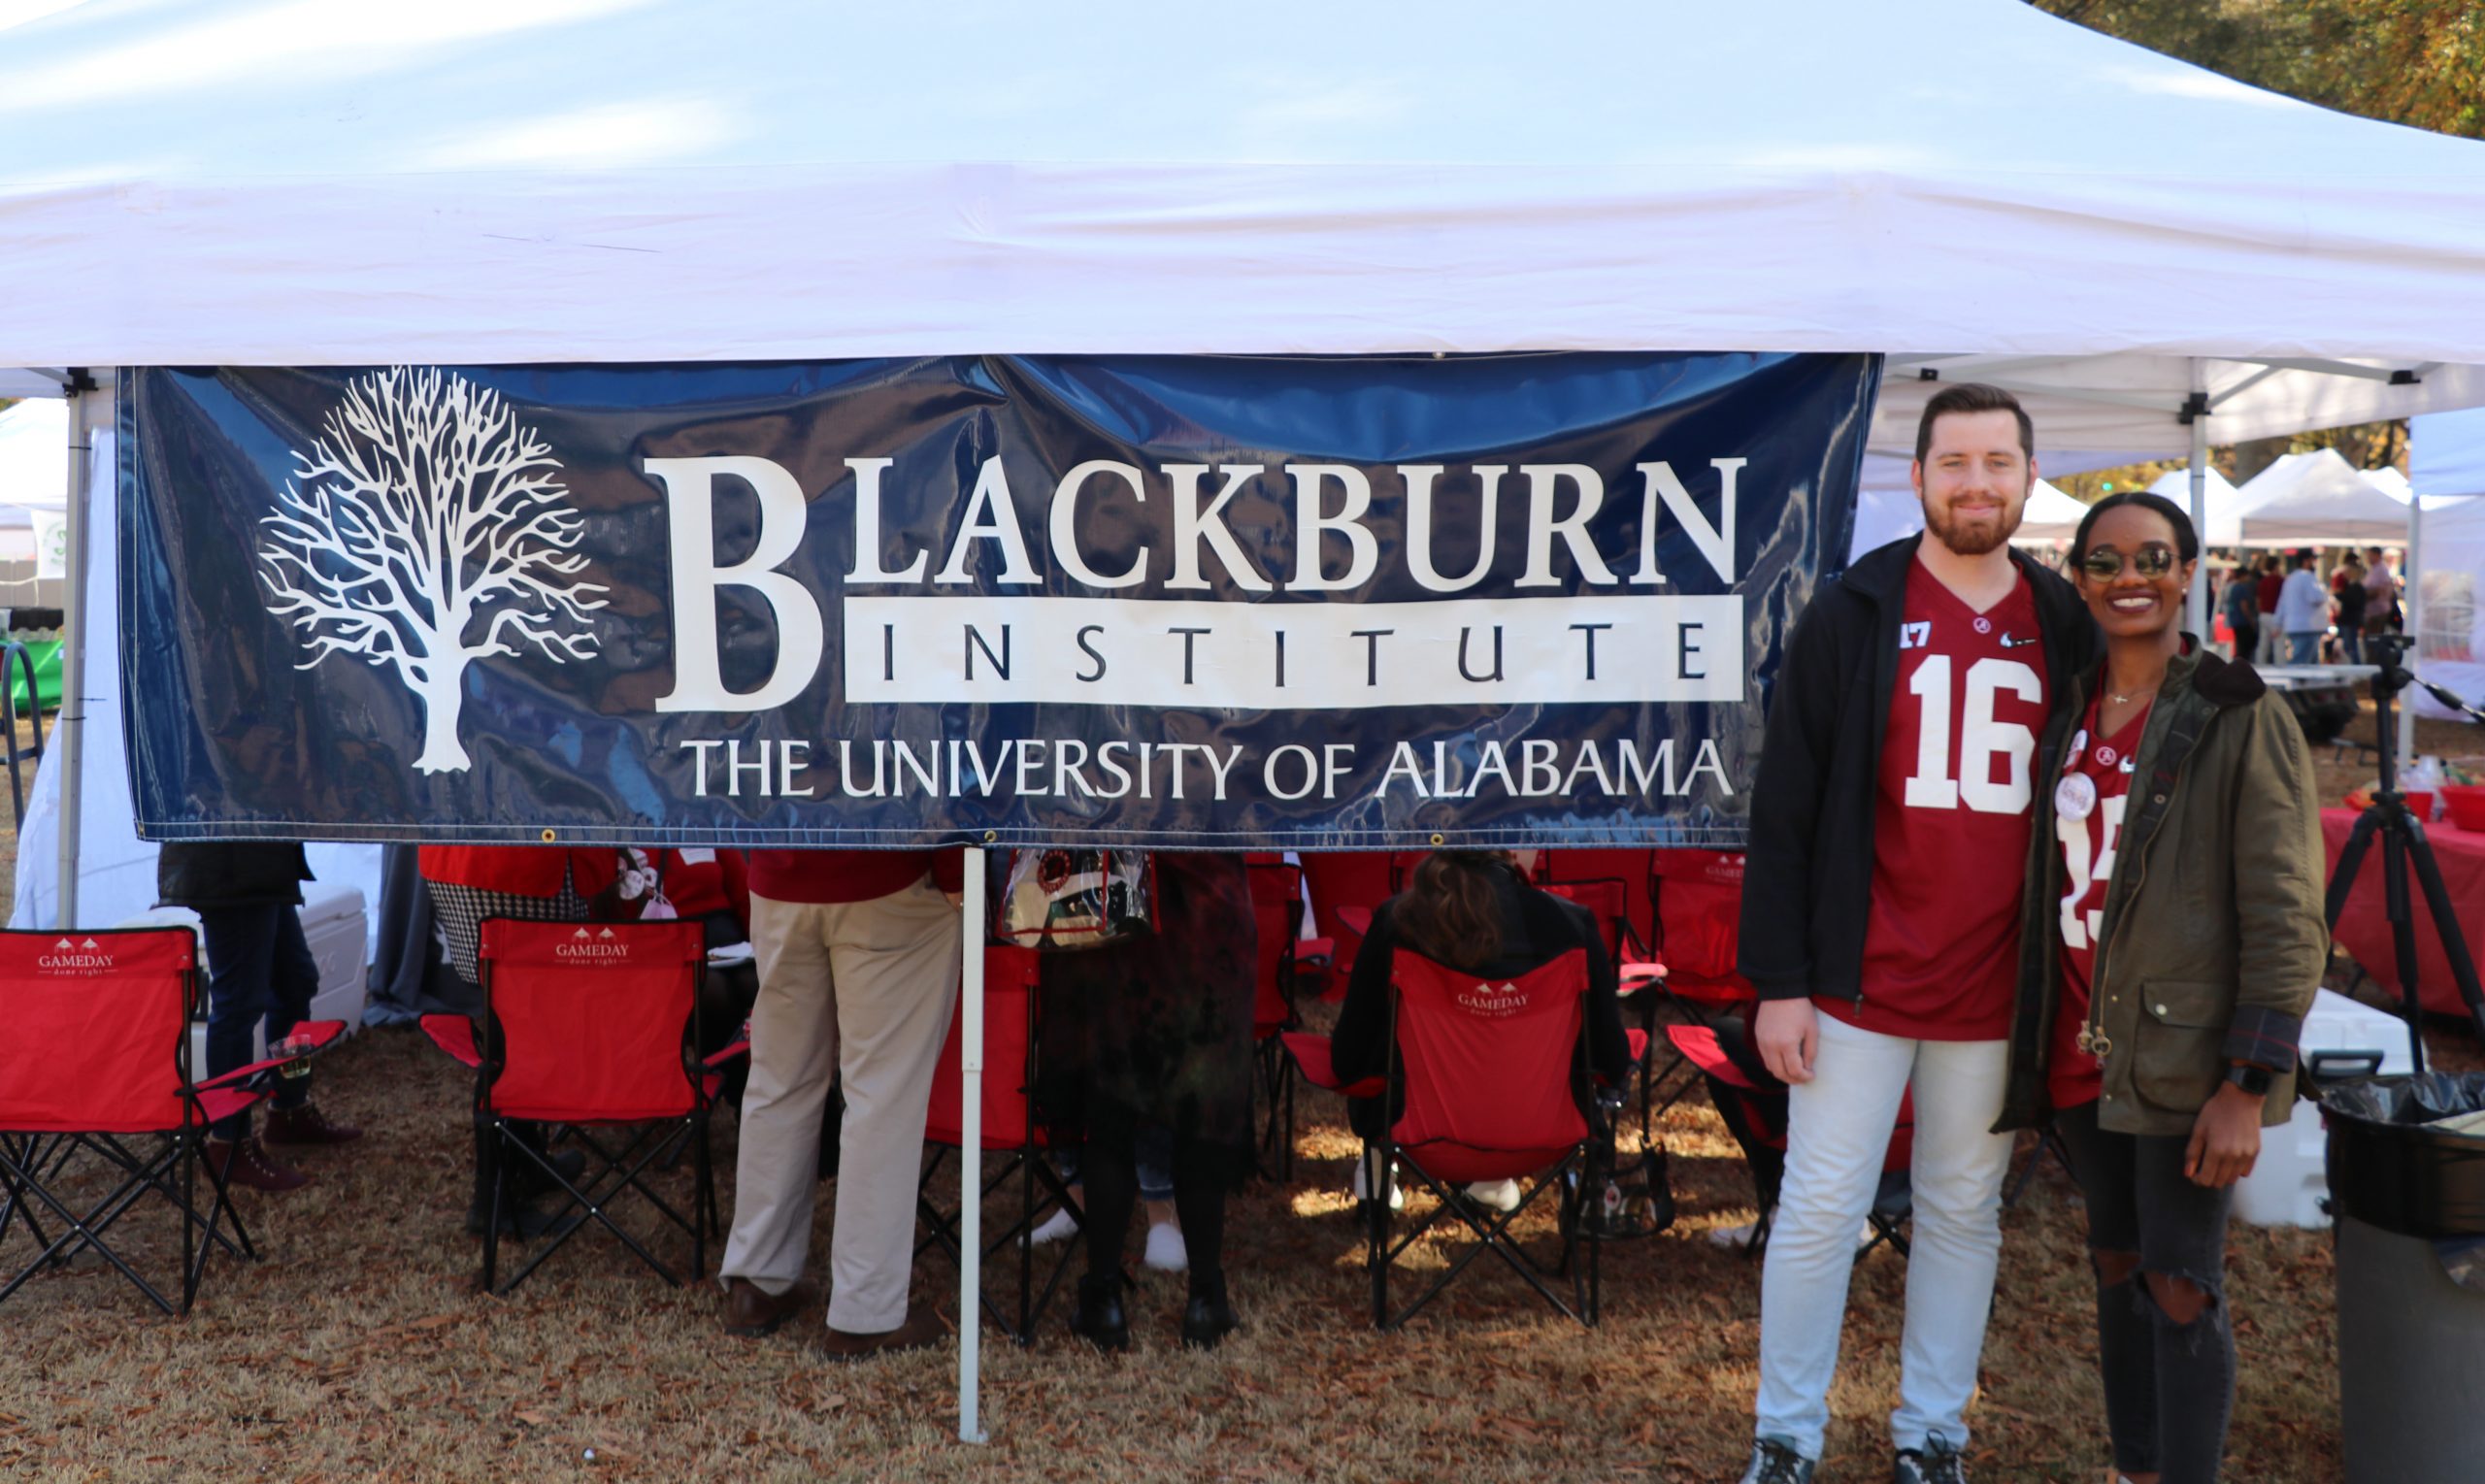 Fellows at a football tailgate